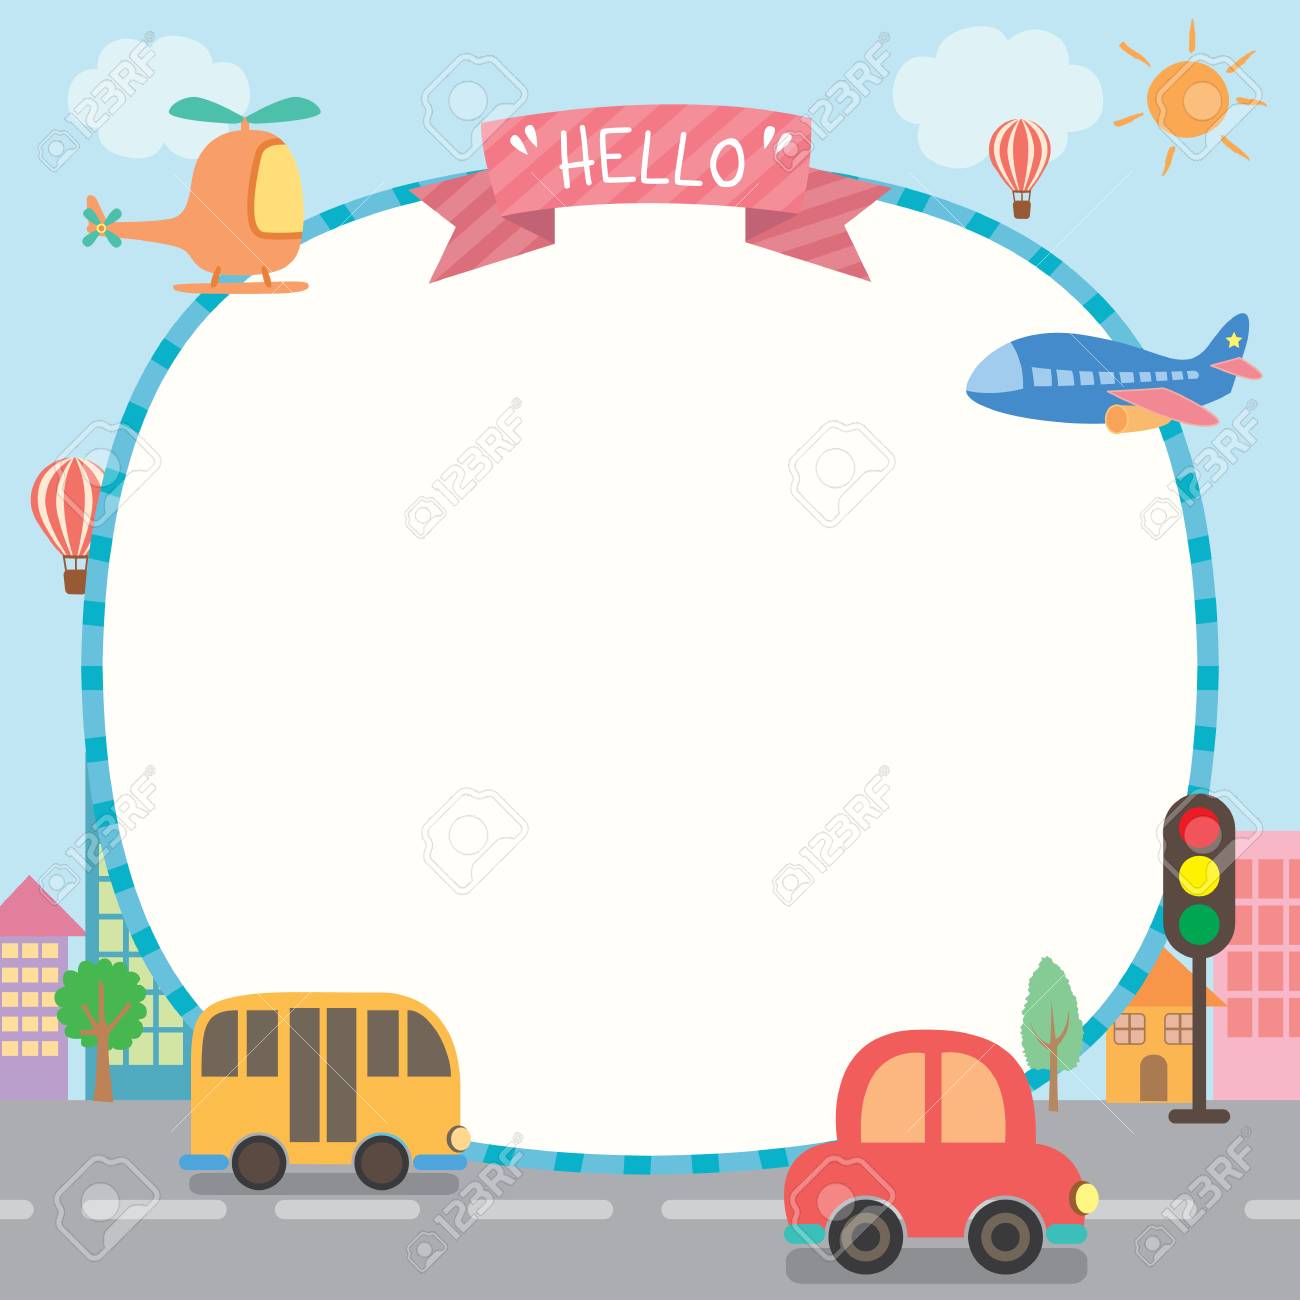 Cute Illustration Of Transportation Decorated With Road And Sky